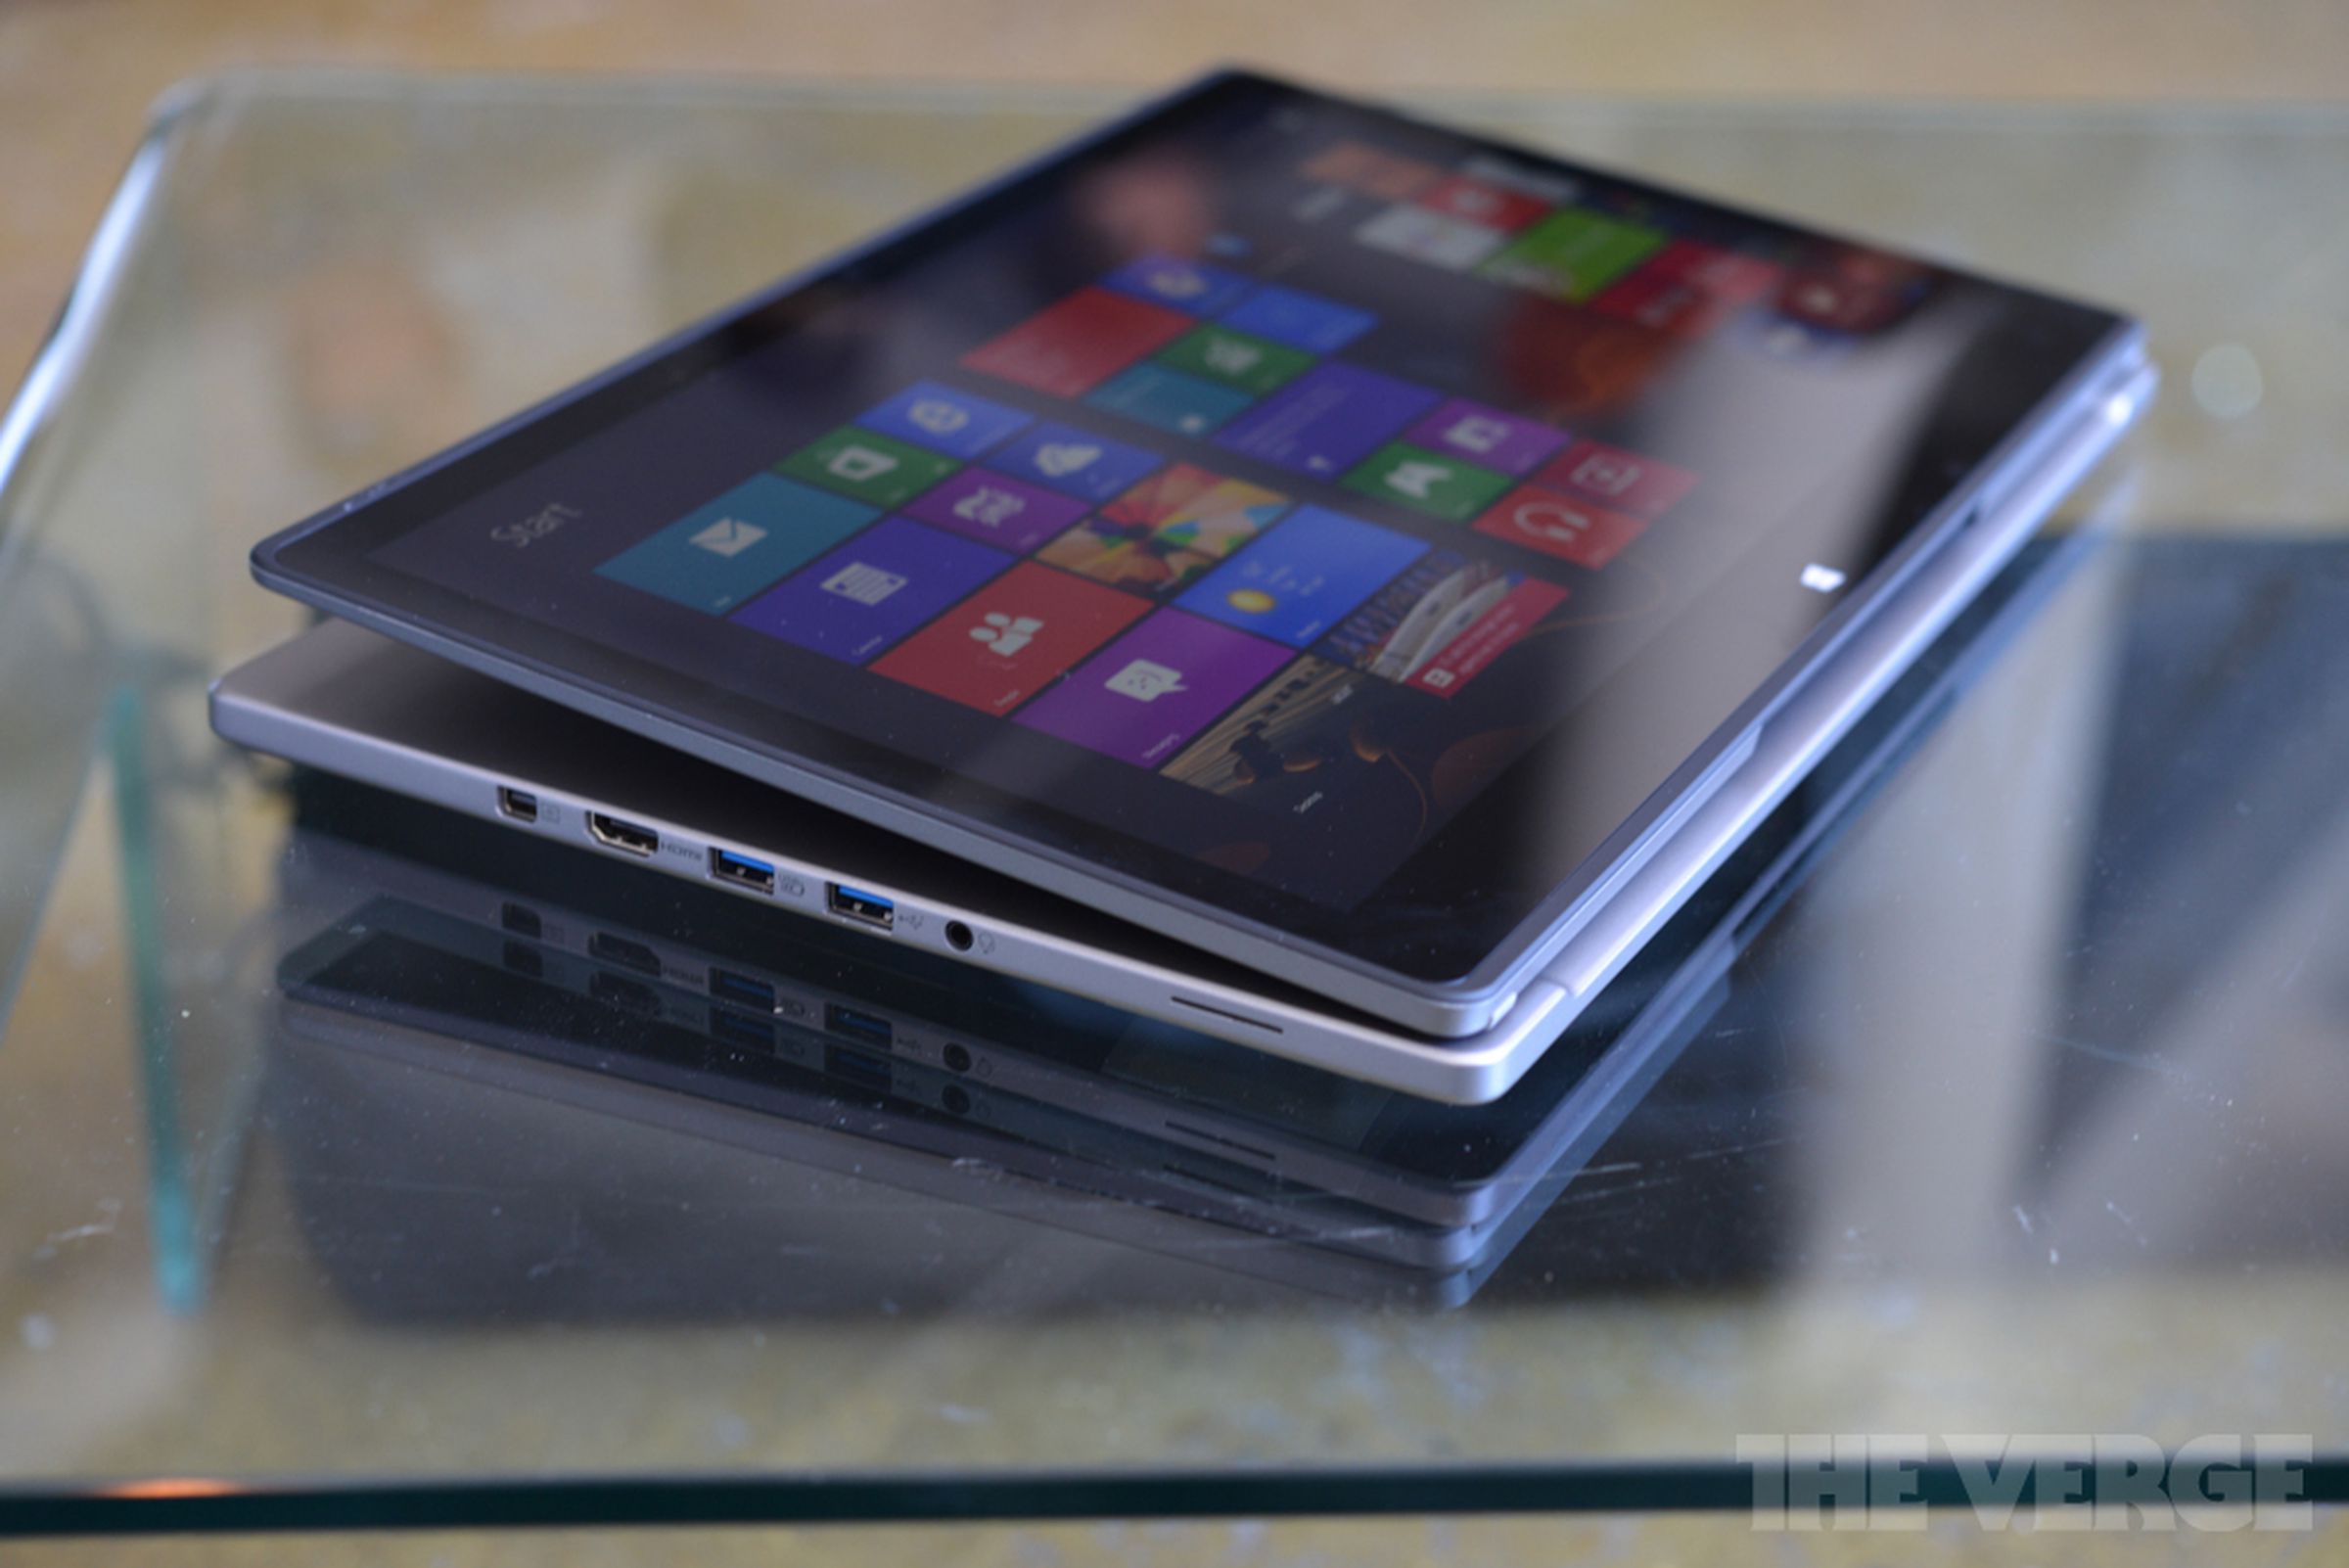 Acer Aspire R7 hands-on pictures